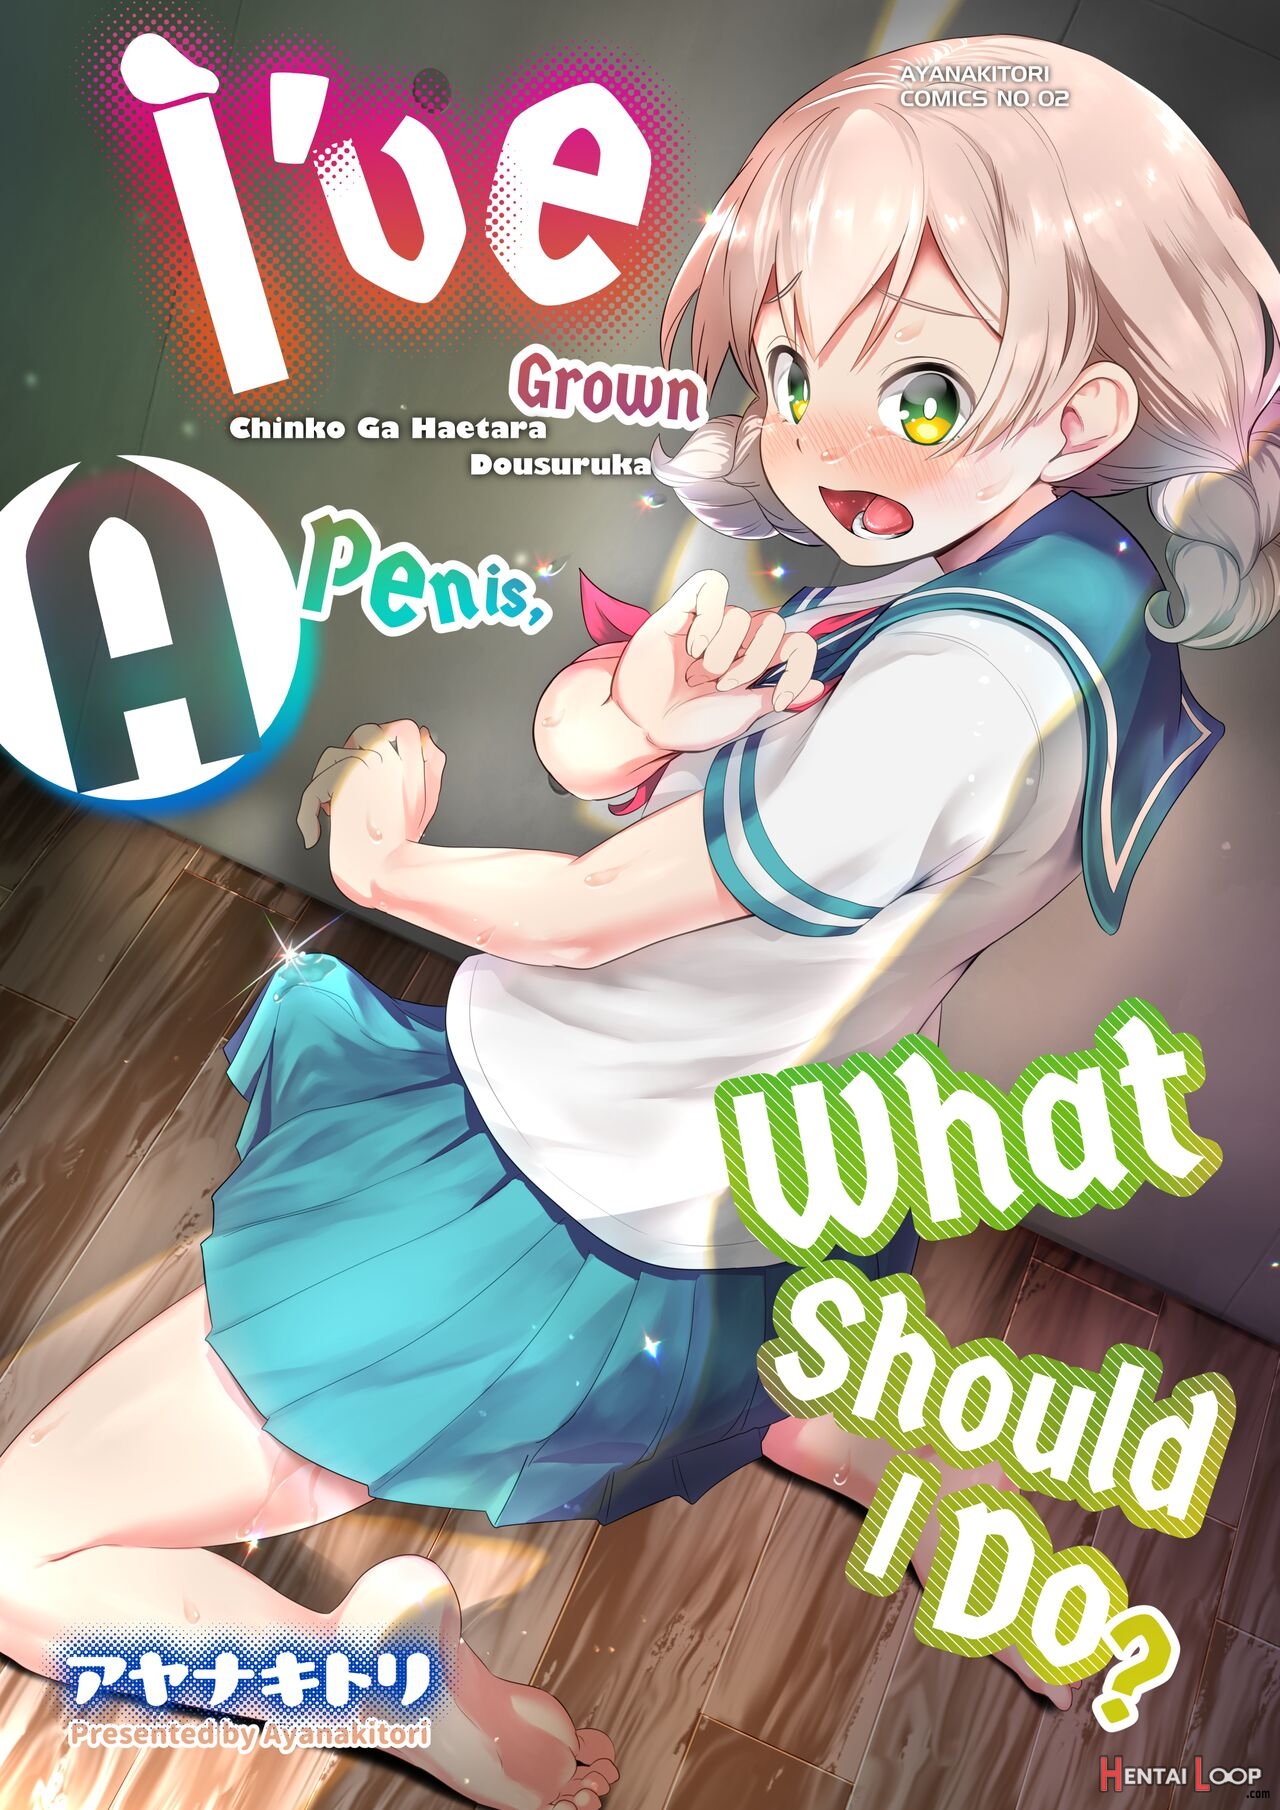 I’ve Grown A Penis, What Should I Do? page 1